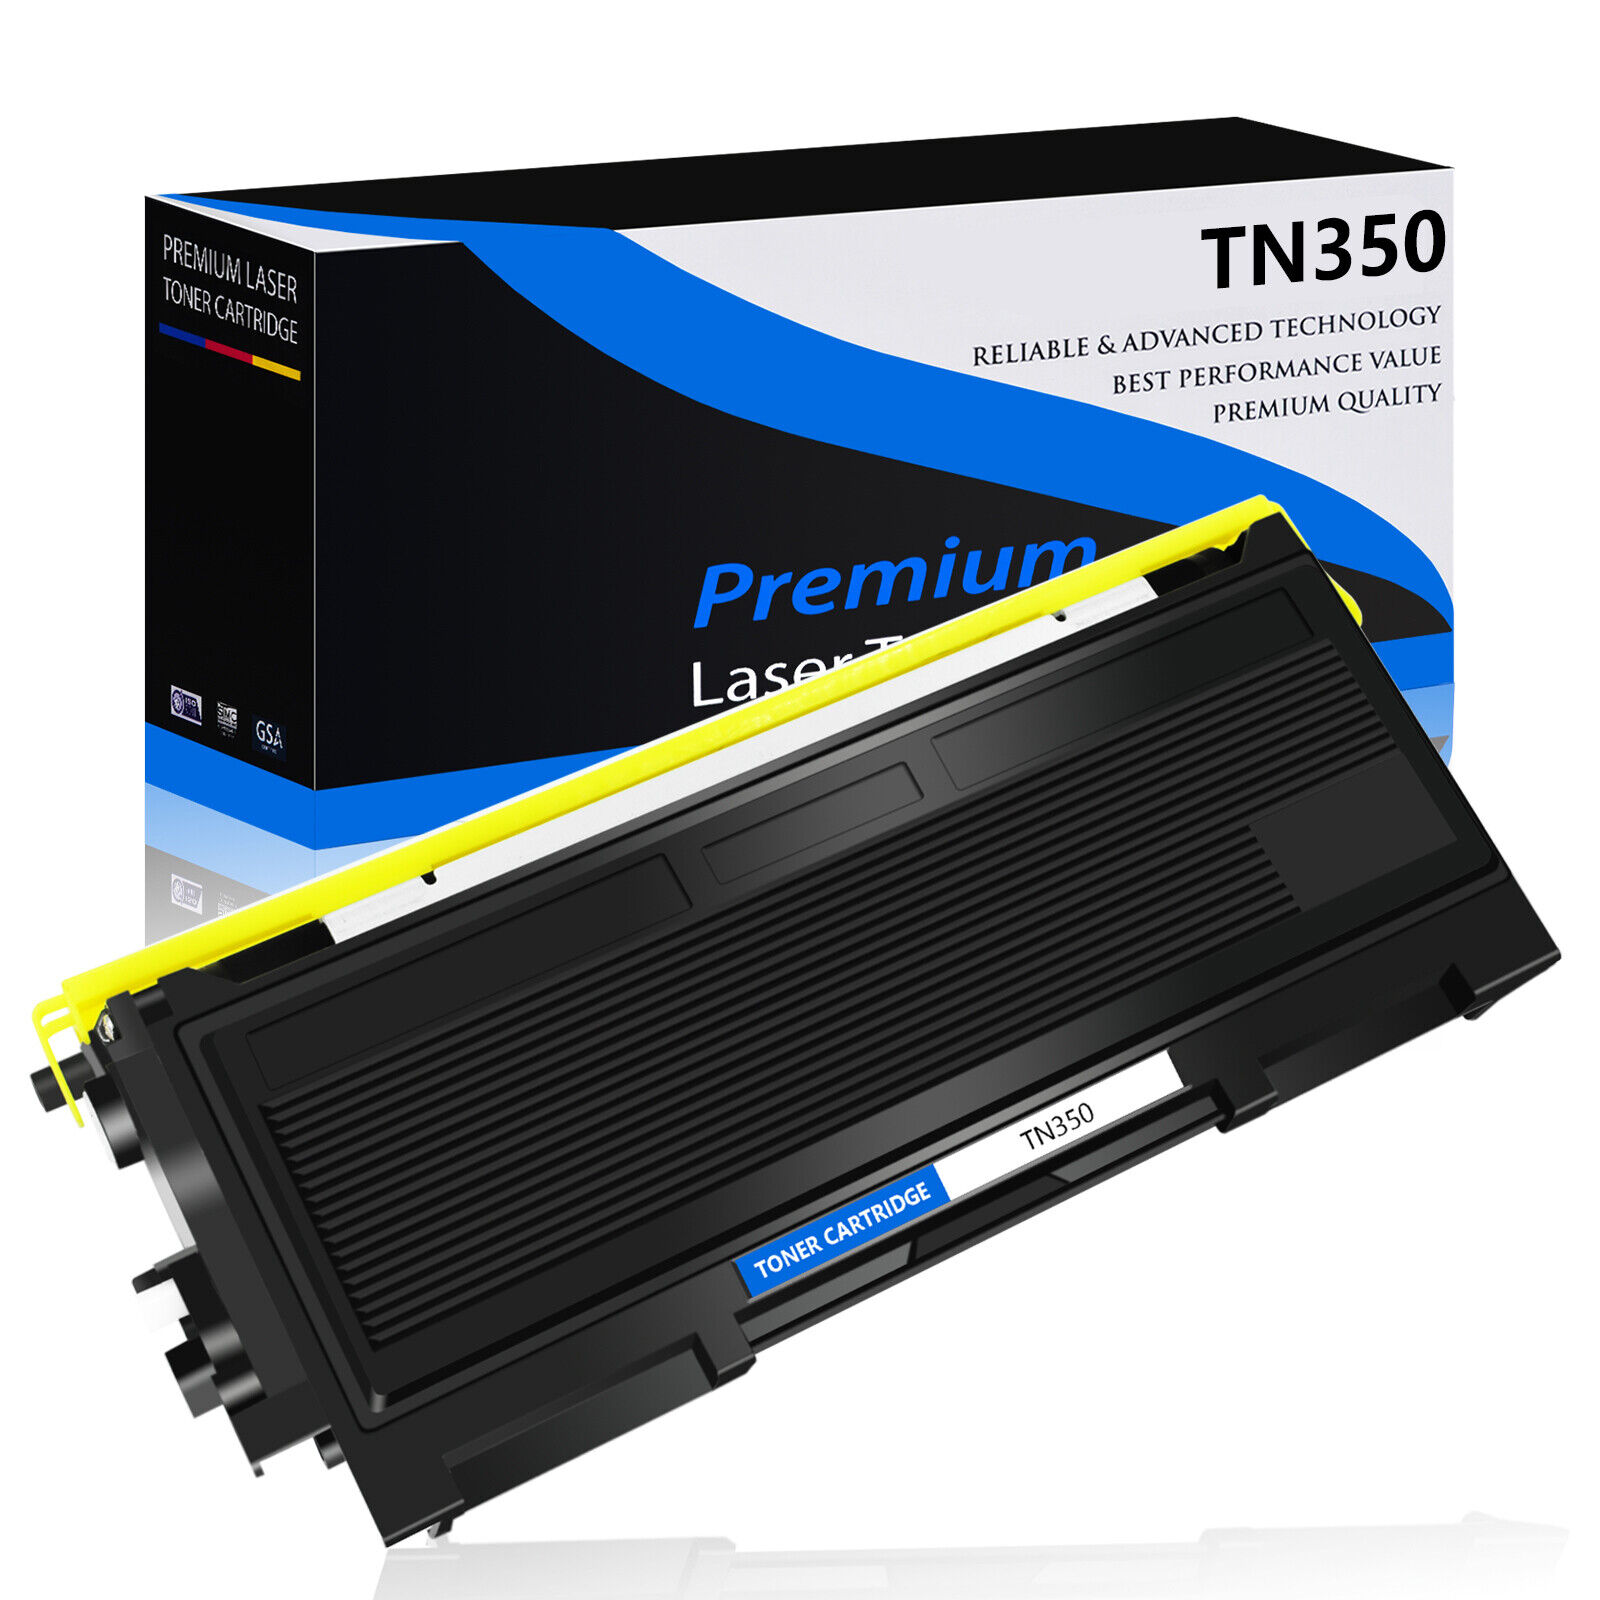 TN350 Black Toner Cartridge Replacement for Brother TN-350 HL-2040 DCP-7025 MFC